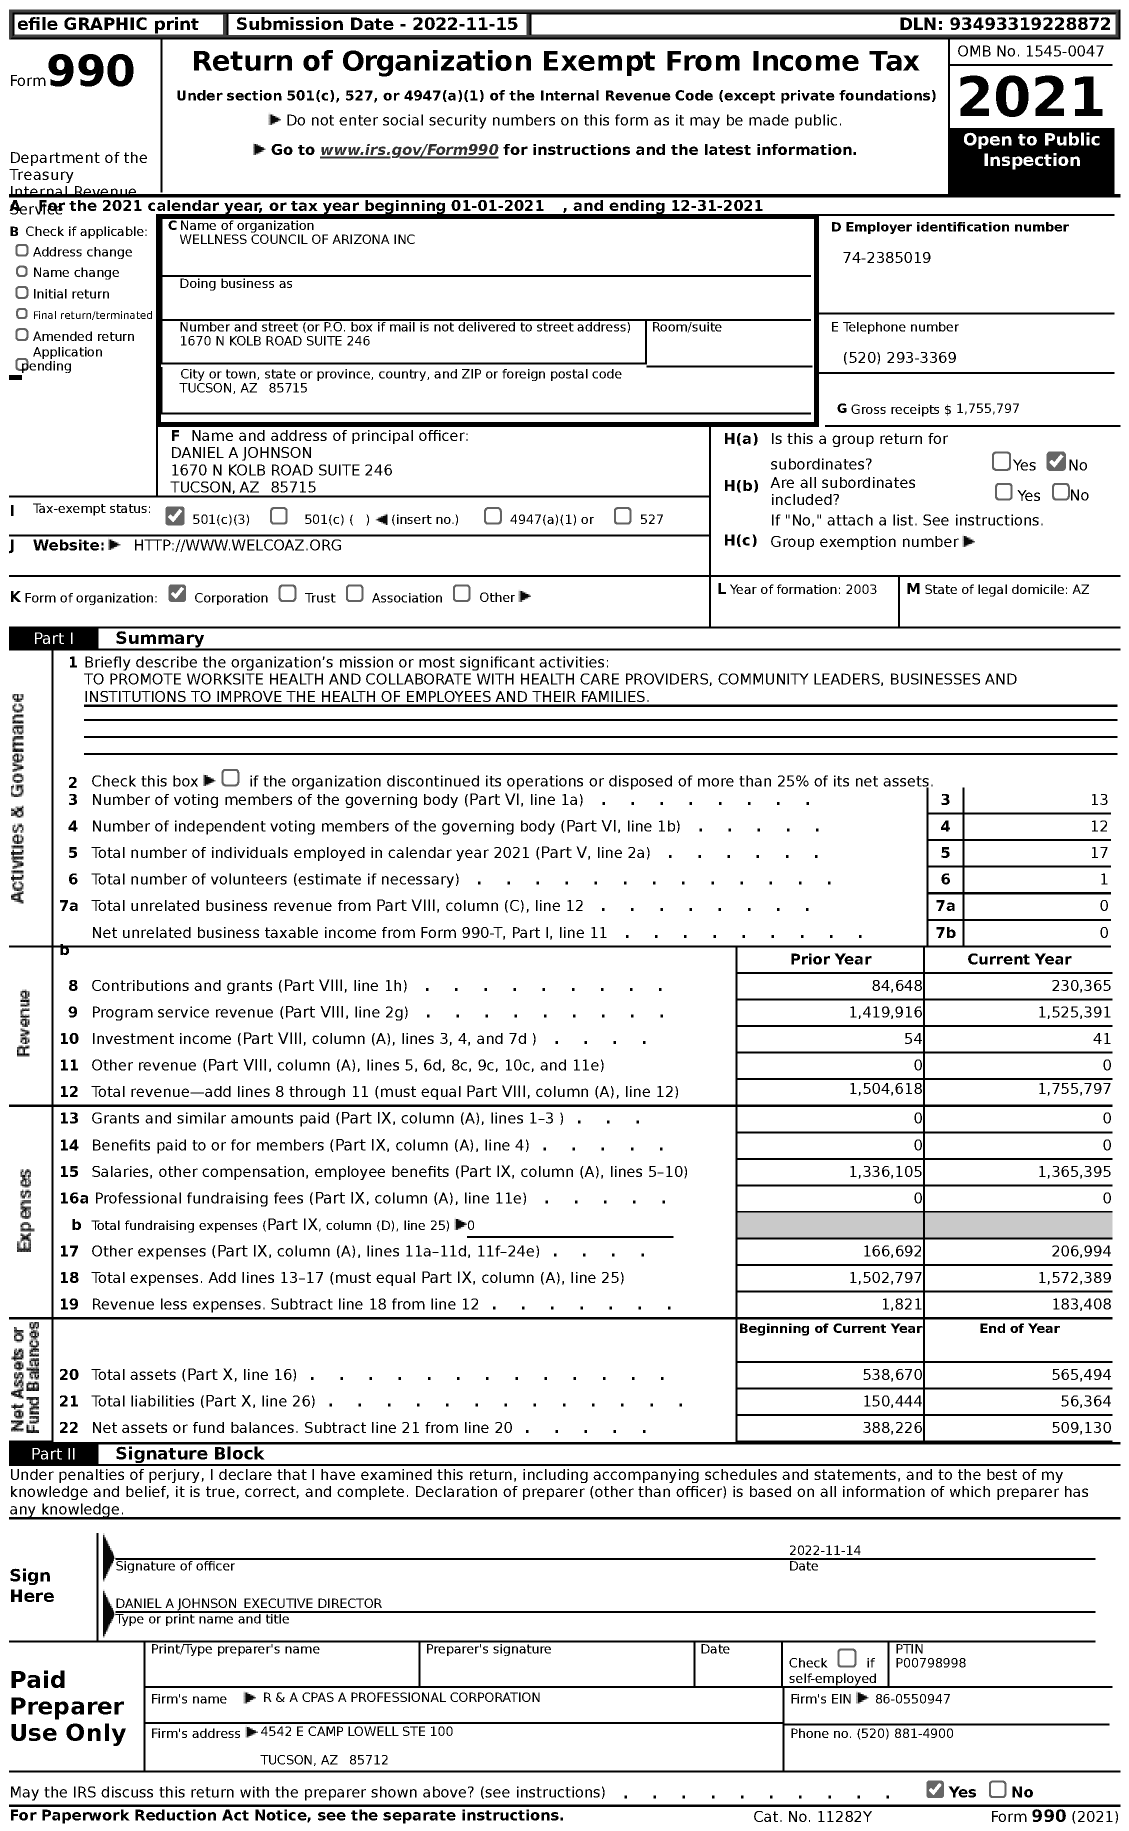 Image of first page of 2021 Form 990 for Wellness Council of Arizona (WELCOAZ)